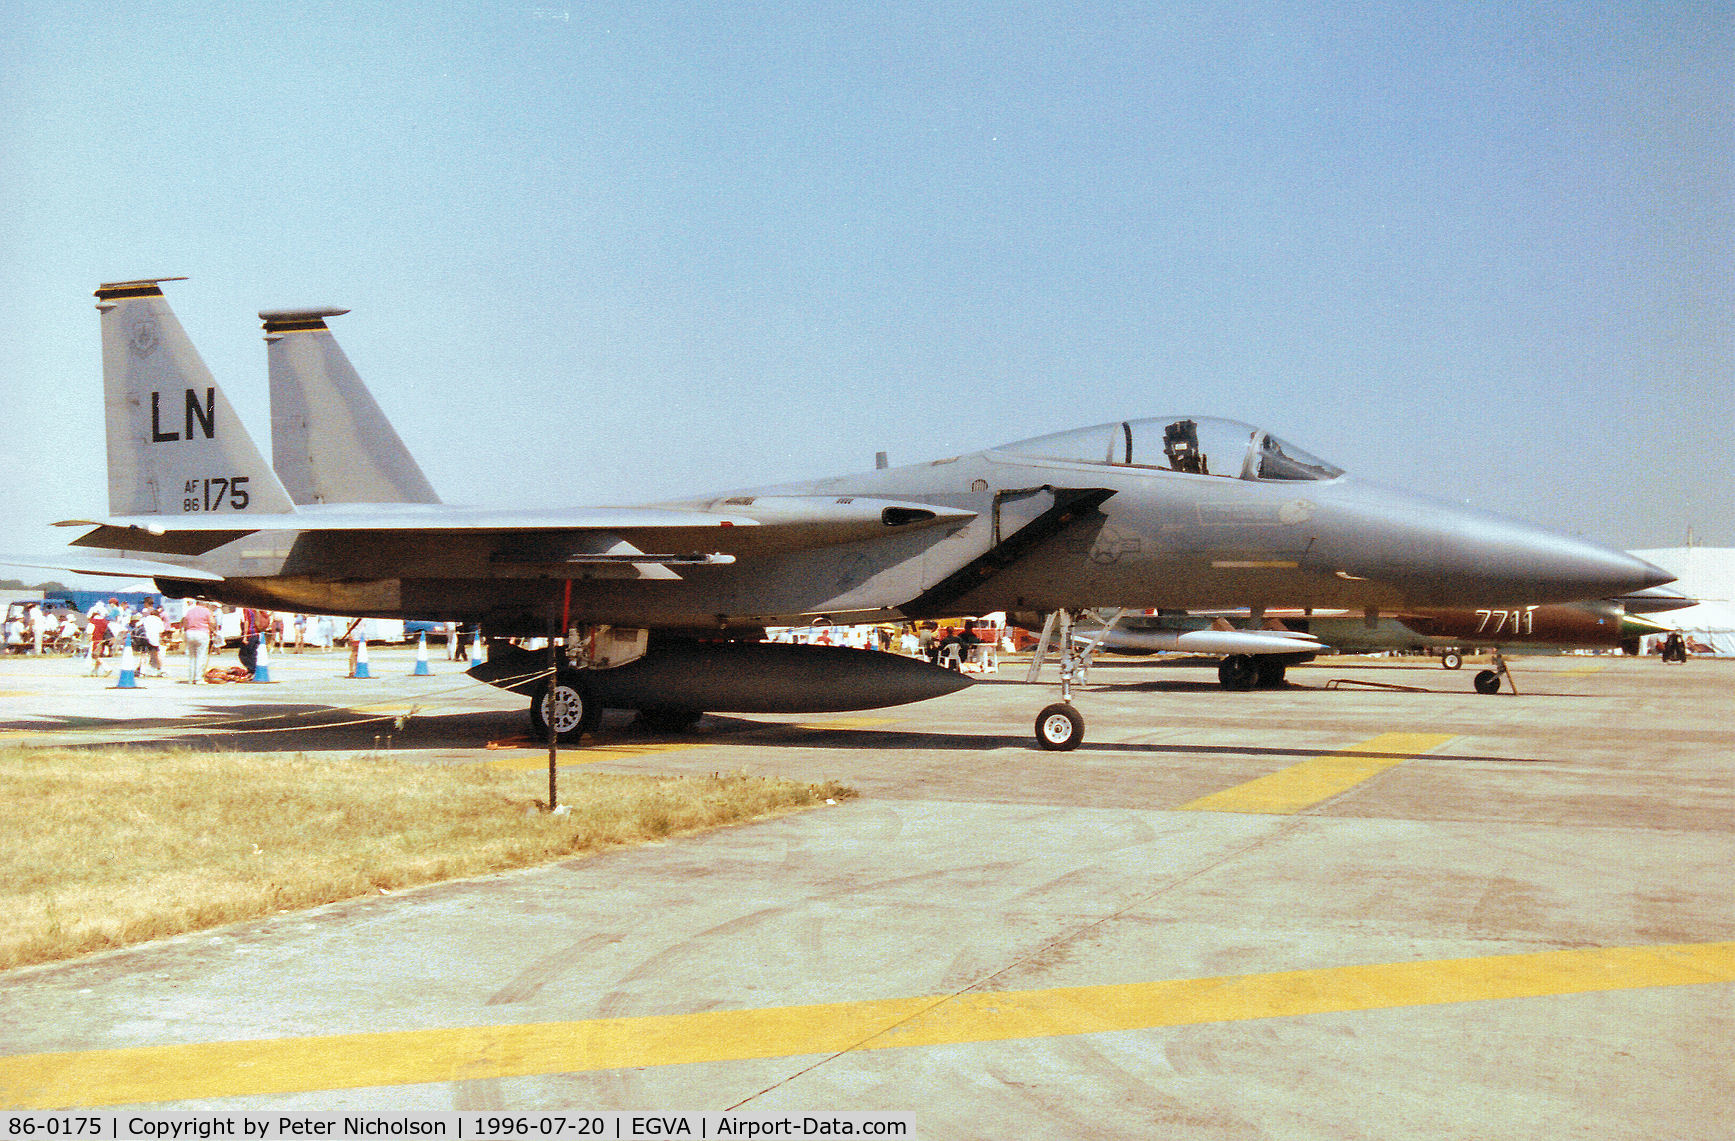 86-0175, 1986 McDonnell Douglas F-15C Eagle C/N 1025/C403, F-15C Eagle of RAF Lakenheath's 493rd Fighter Squadron/48th Fighter Wing on display at the 1996 Royal Intnl Air Tattoo at RAF Fairford.